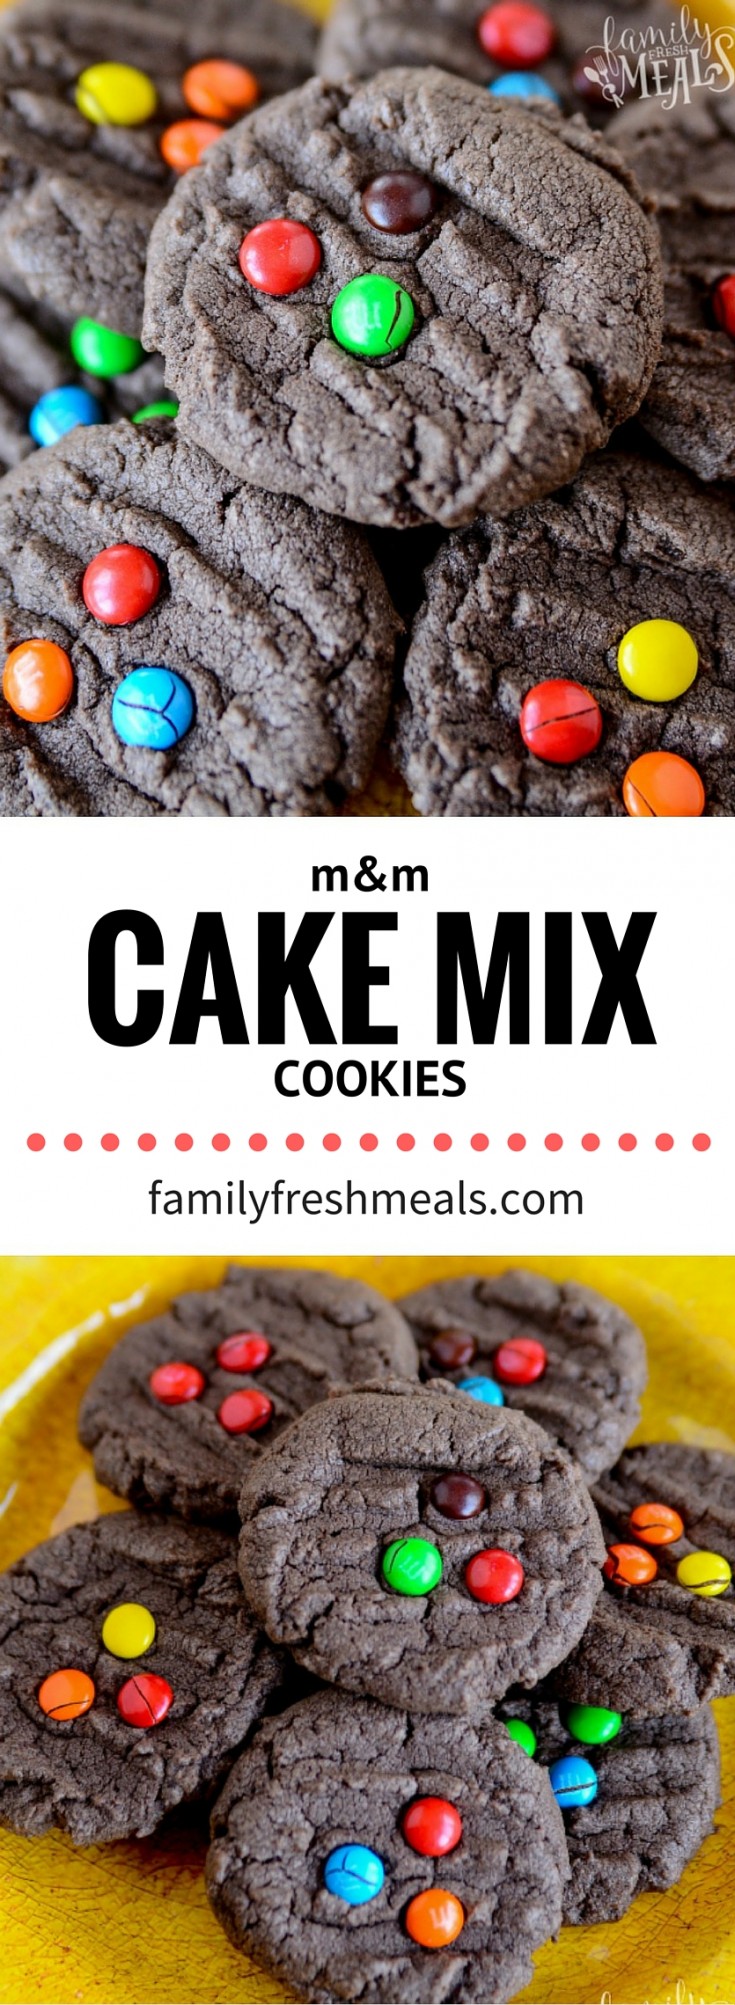 M&M Chocolate Cake Mix Cookies - Family Fresh Meals